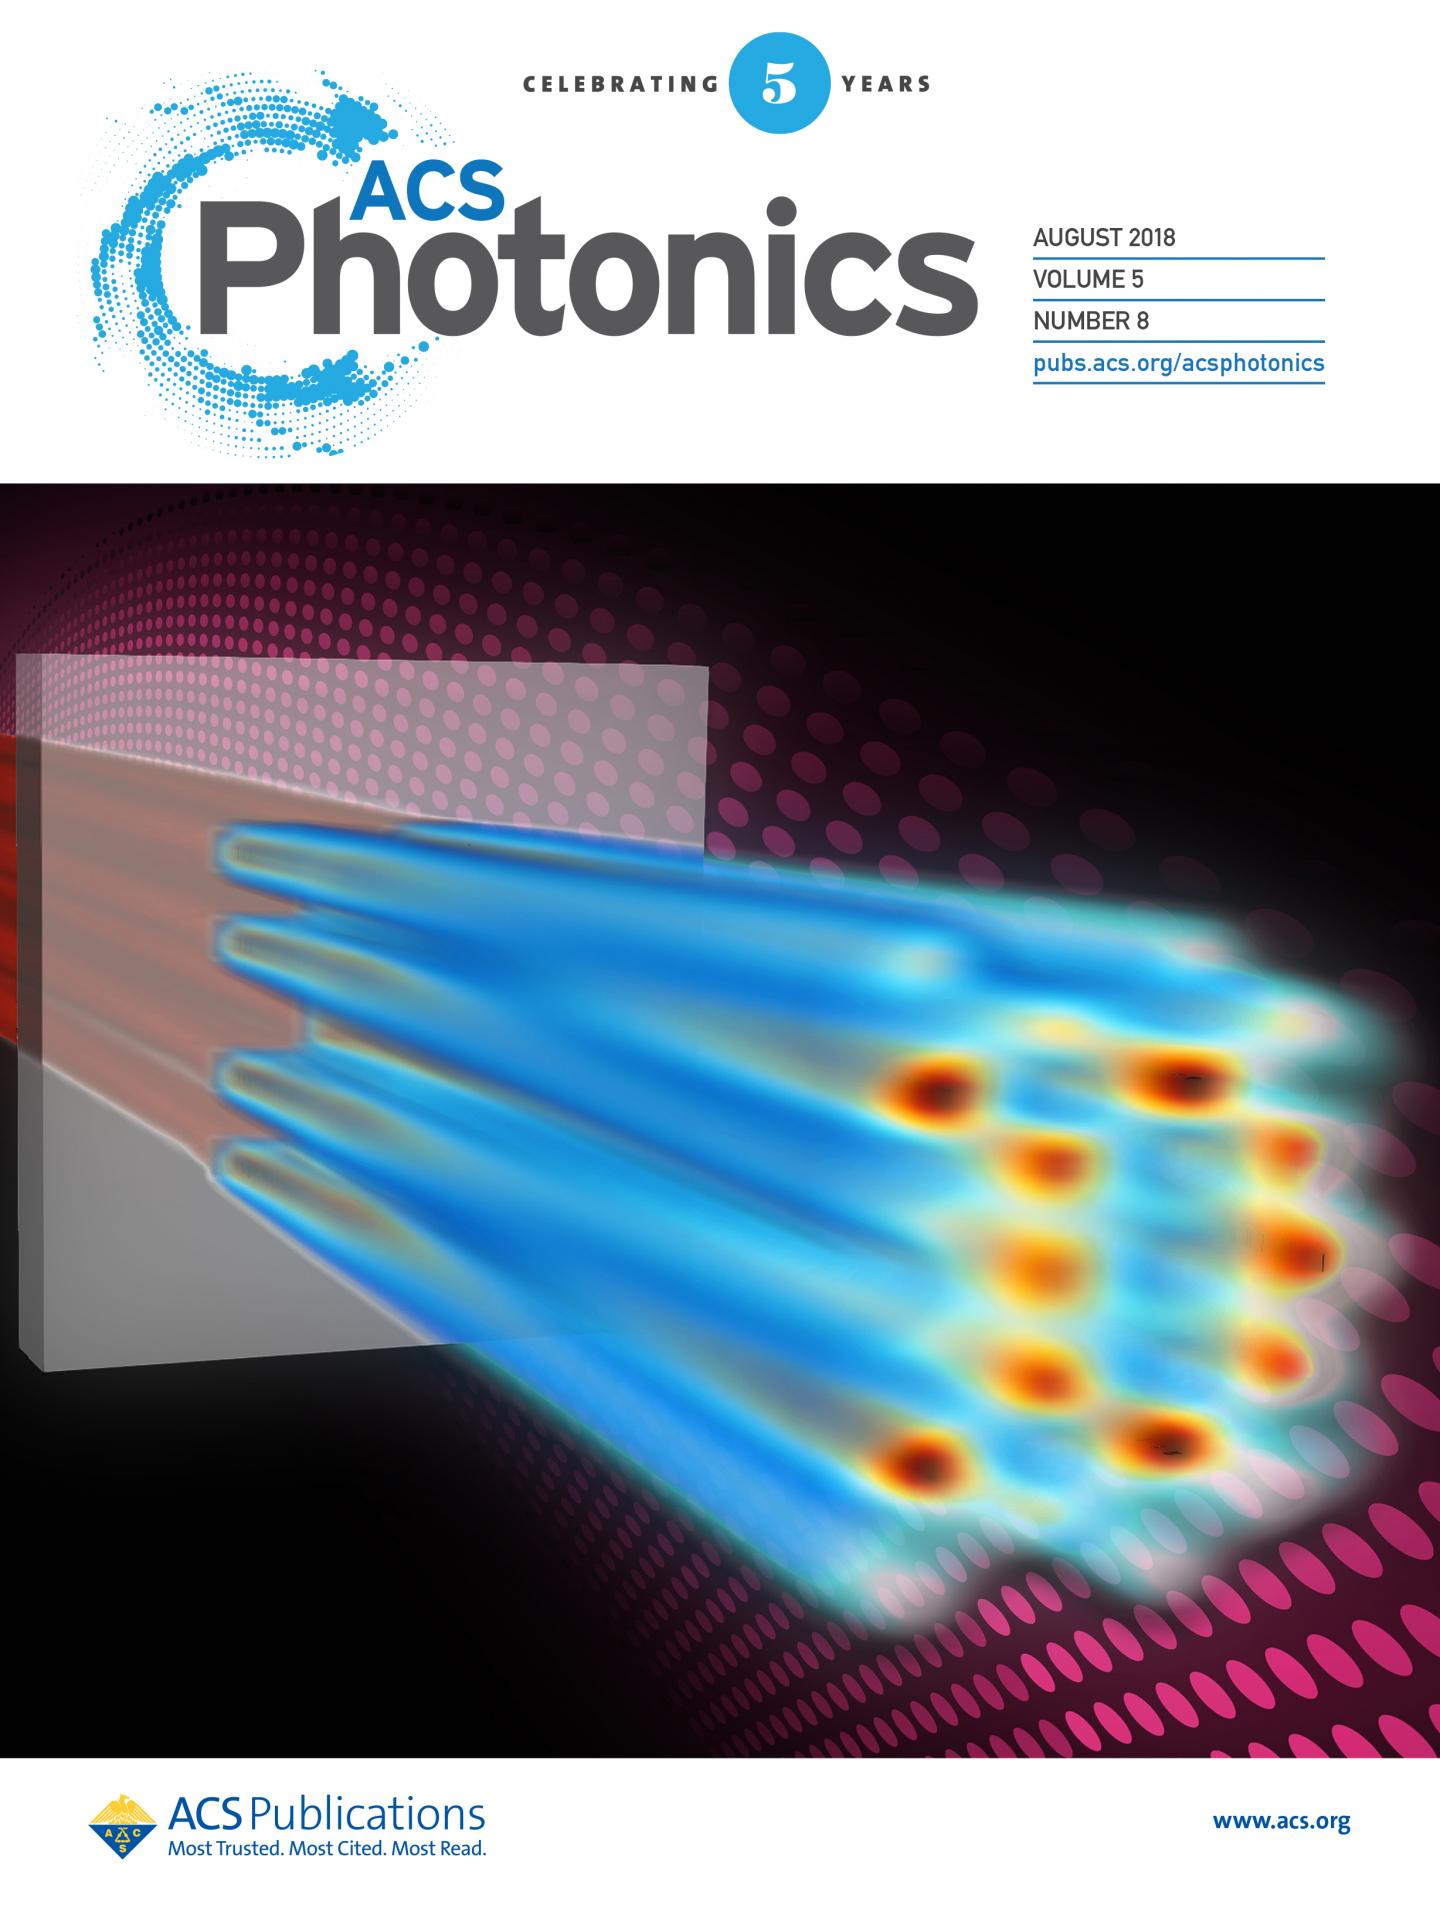 Cover of ACS Photonics journal featuring the researcher's work. Source: University of Sussex/ACS Photonics